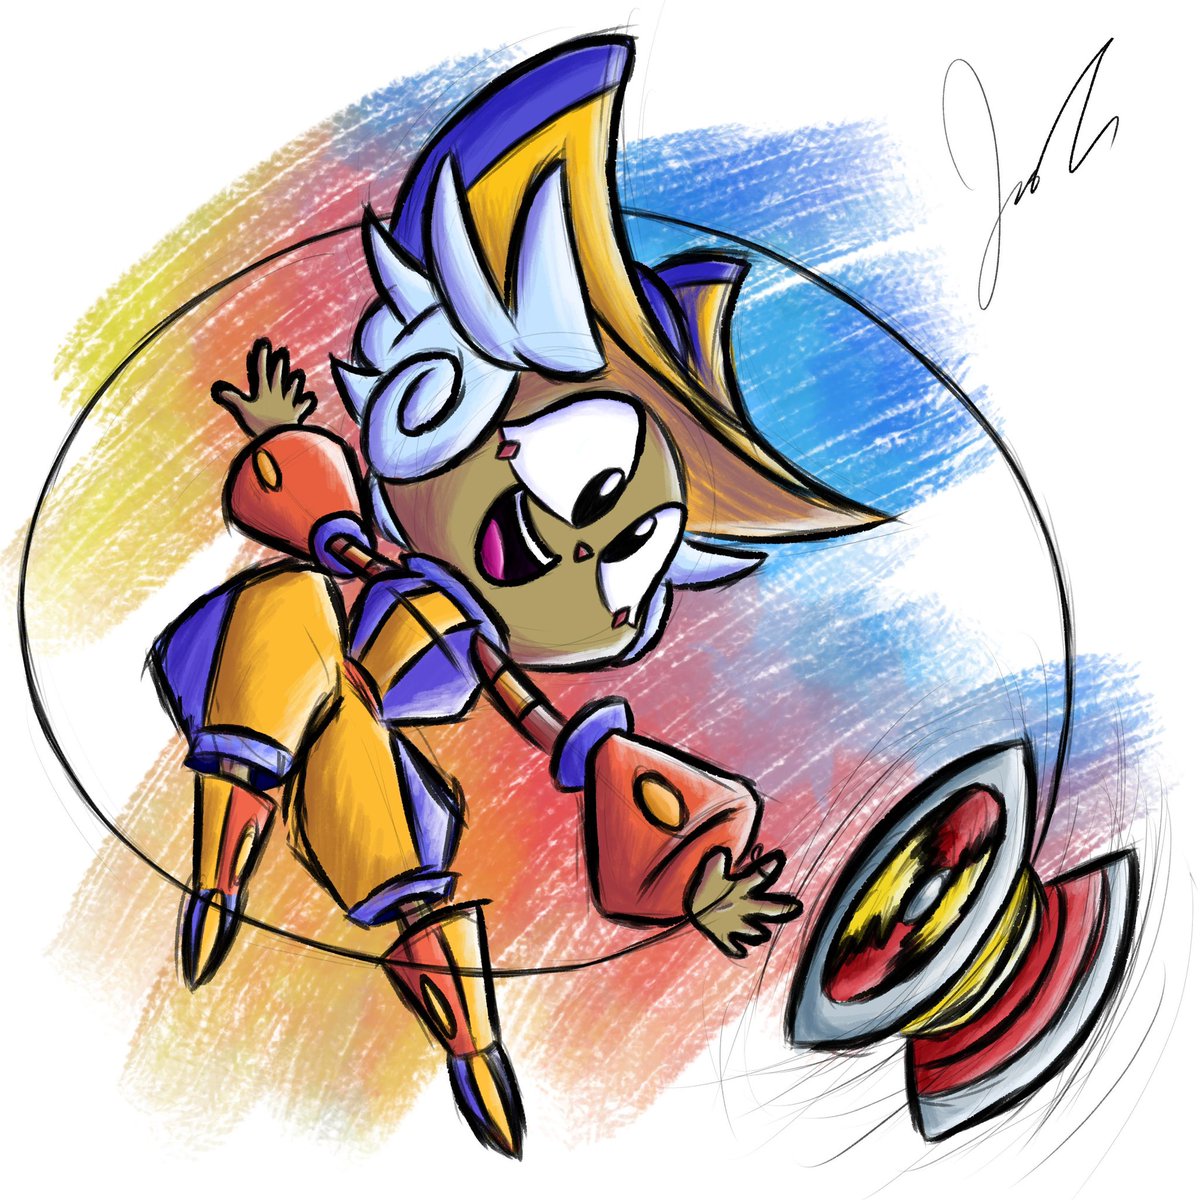 I haven’t experienced the fun in playing 3D Platformers like Penny’s Big Breakaway in quite some time. Highly recommend 🪀 #pennysbigbreakaway #pennysbigbreakawayfanart #eveningstarstudio #pennysbigbreakawayart #3dplatformer #indiegame #art #digitalart #drawing #sketch #fanart